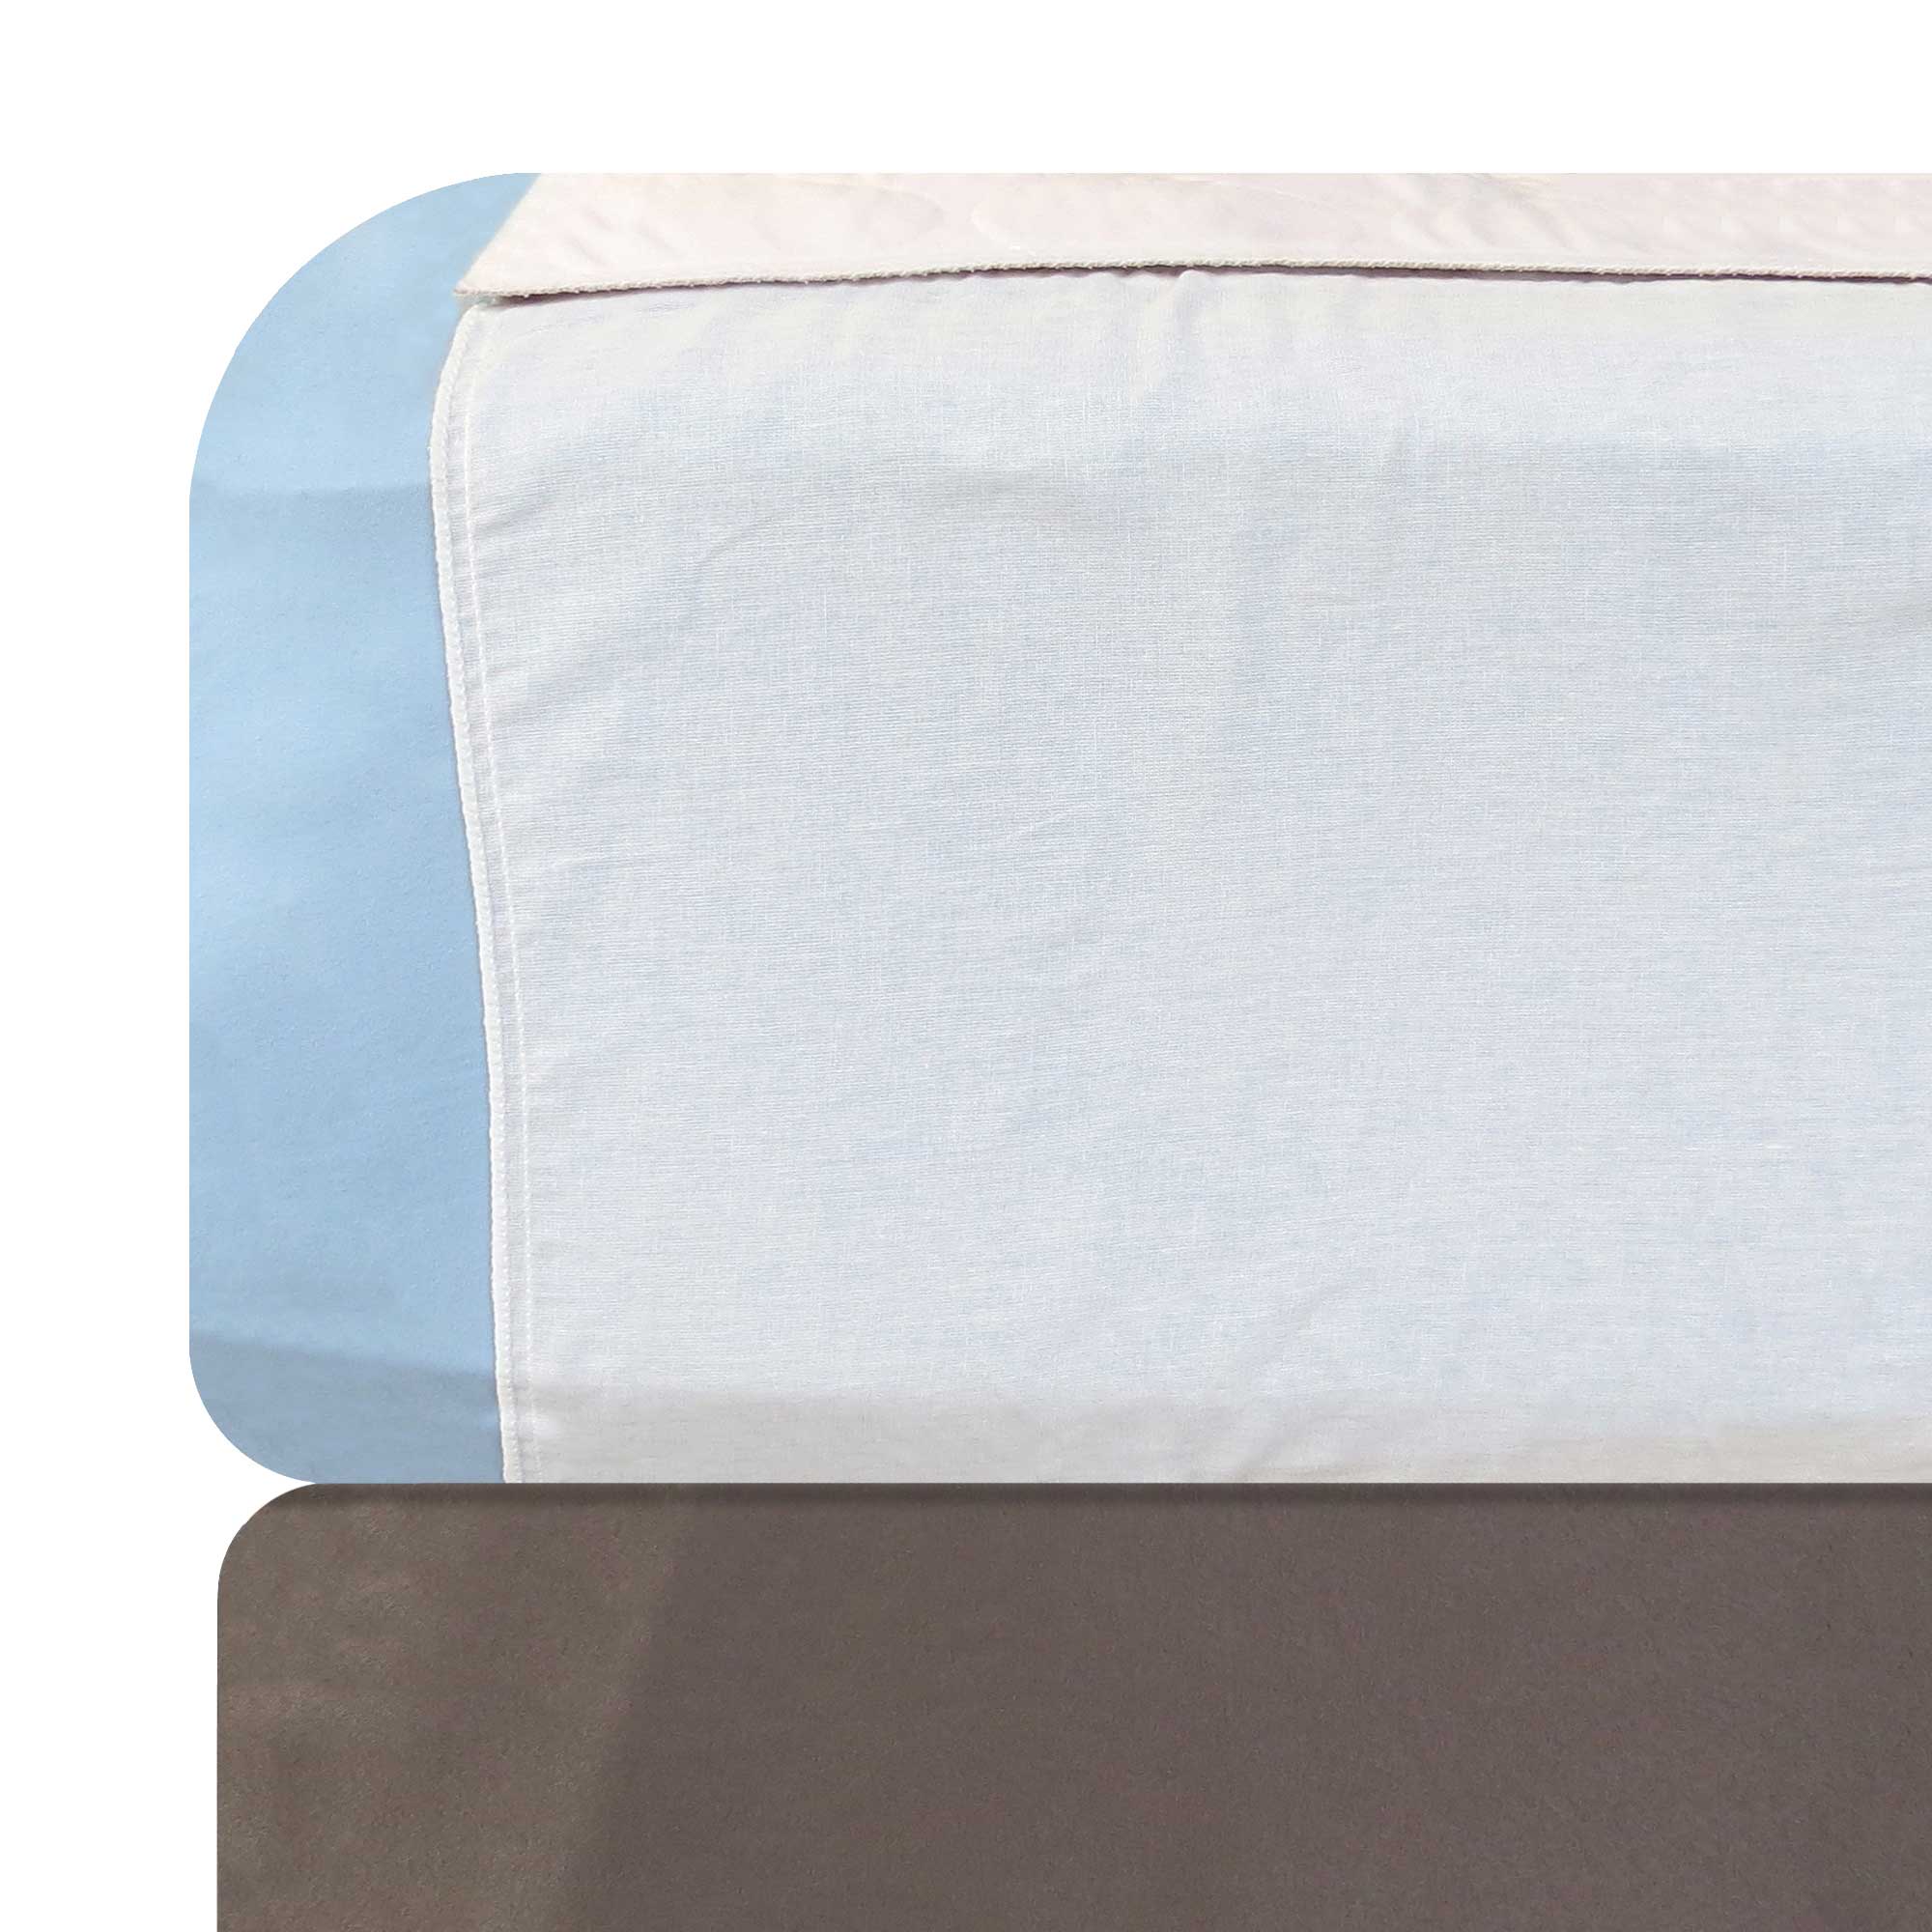 Dry Defender Waterproof Bed Pads for Incontinence - Absorbent Washable  Underpad - Mattress Pads for Kids or Adults 